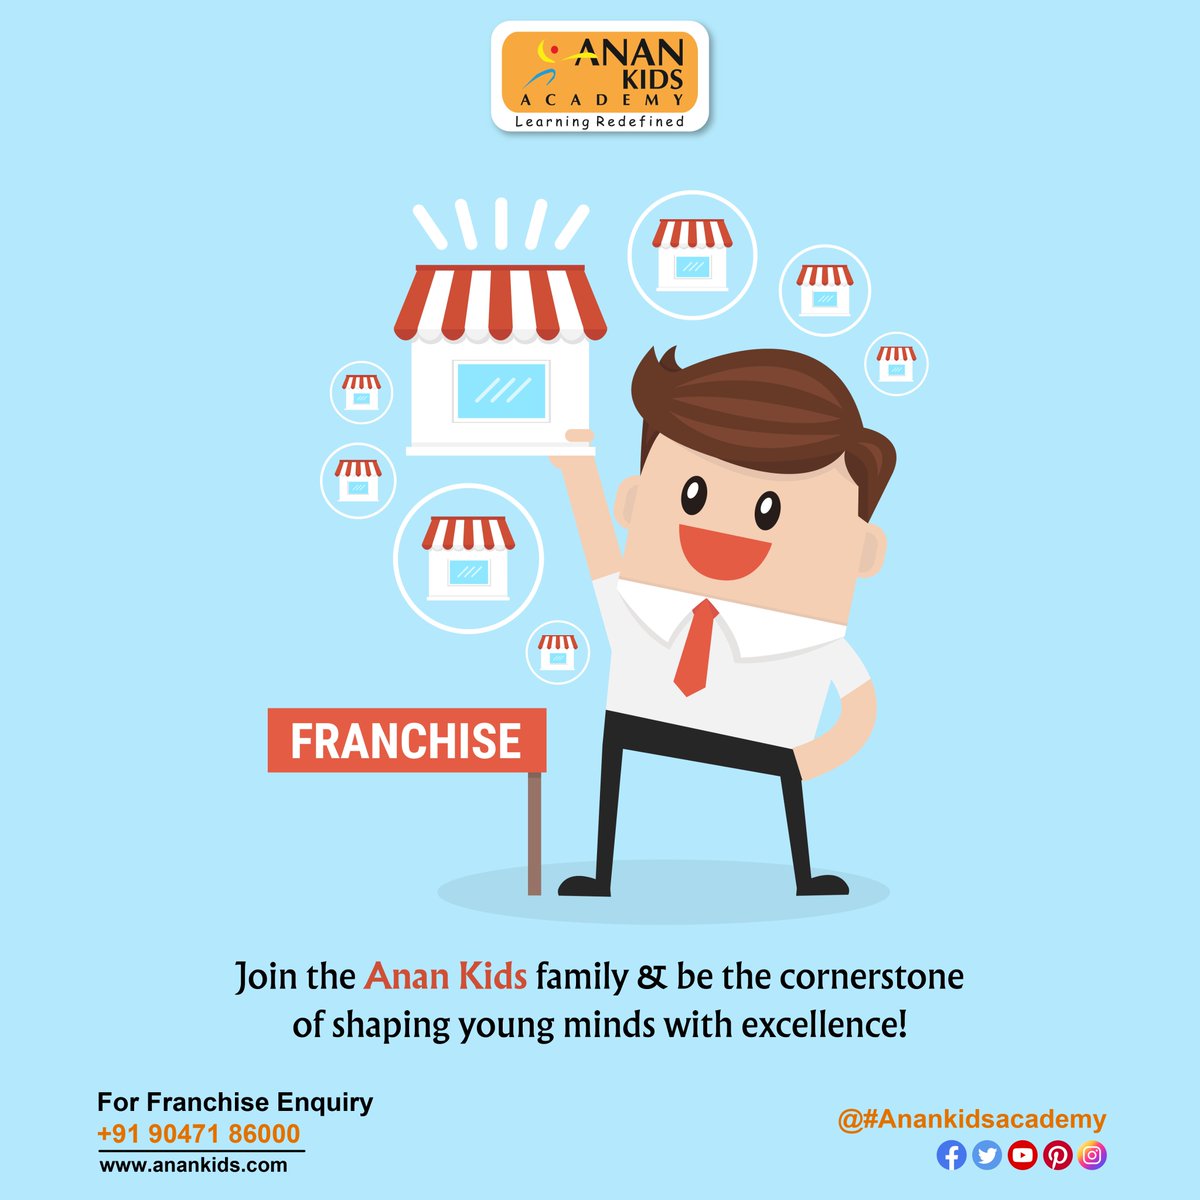 #OpportunityKnocks! We're #InvitingFranchise partners to embark on a rewarding journey of nurturing young minds.

For #schoolfranchise enquiry, visit: anankids.com
Contact: 90471 86000

#preschoolfranchise #kindergarten #franchiseindia #entrepreneur #school #business